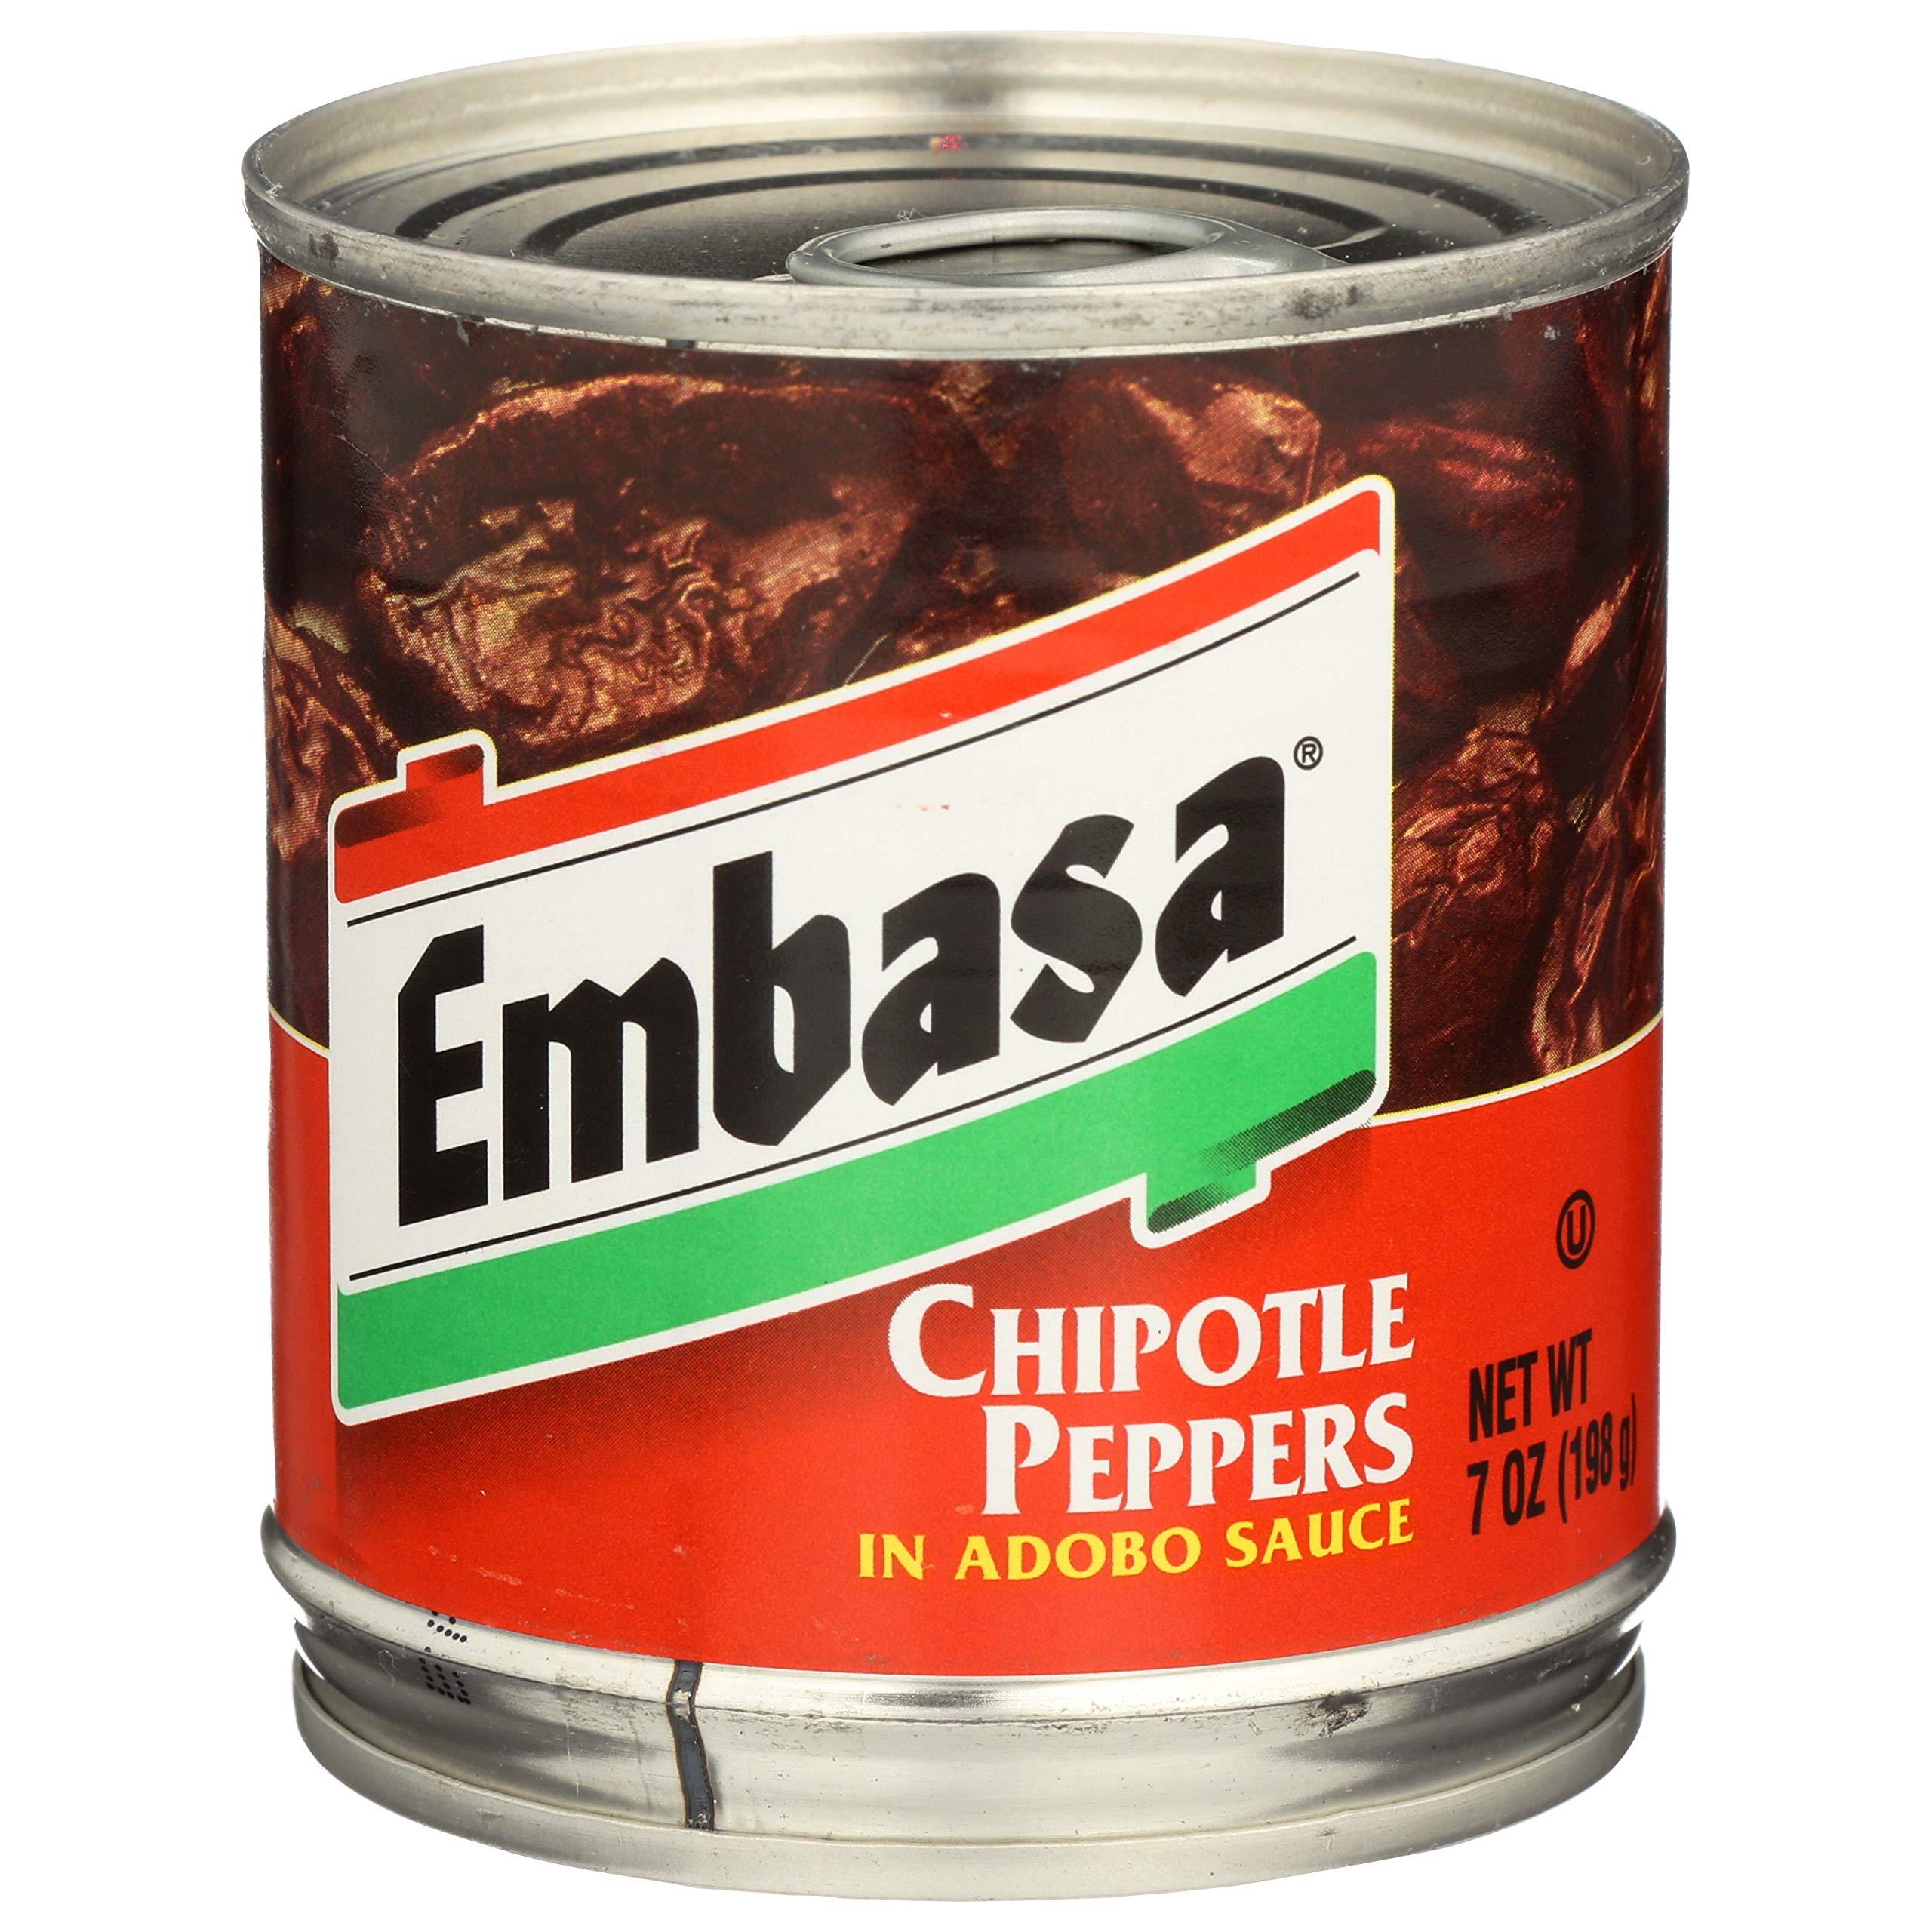 Embasa Chipotle Peppers in Adobo Sauce, 7 oz, Pack of 3